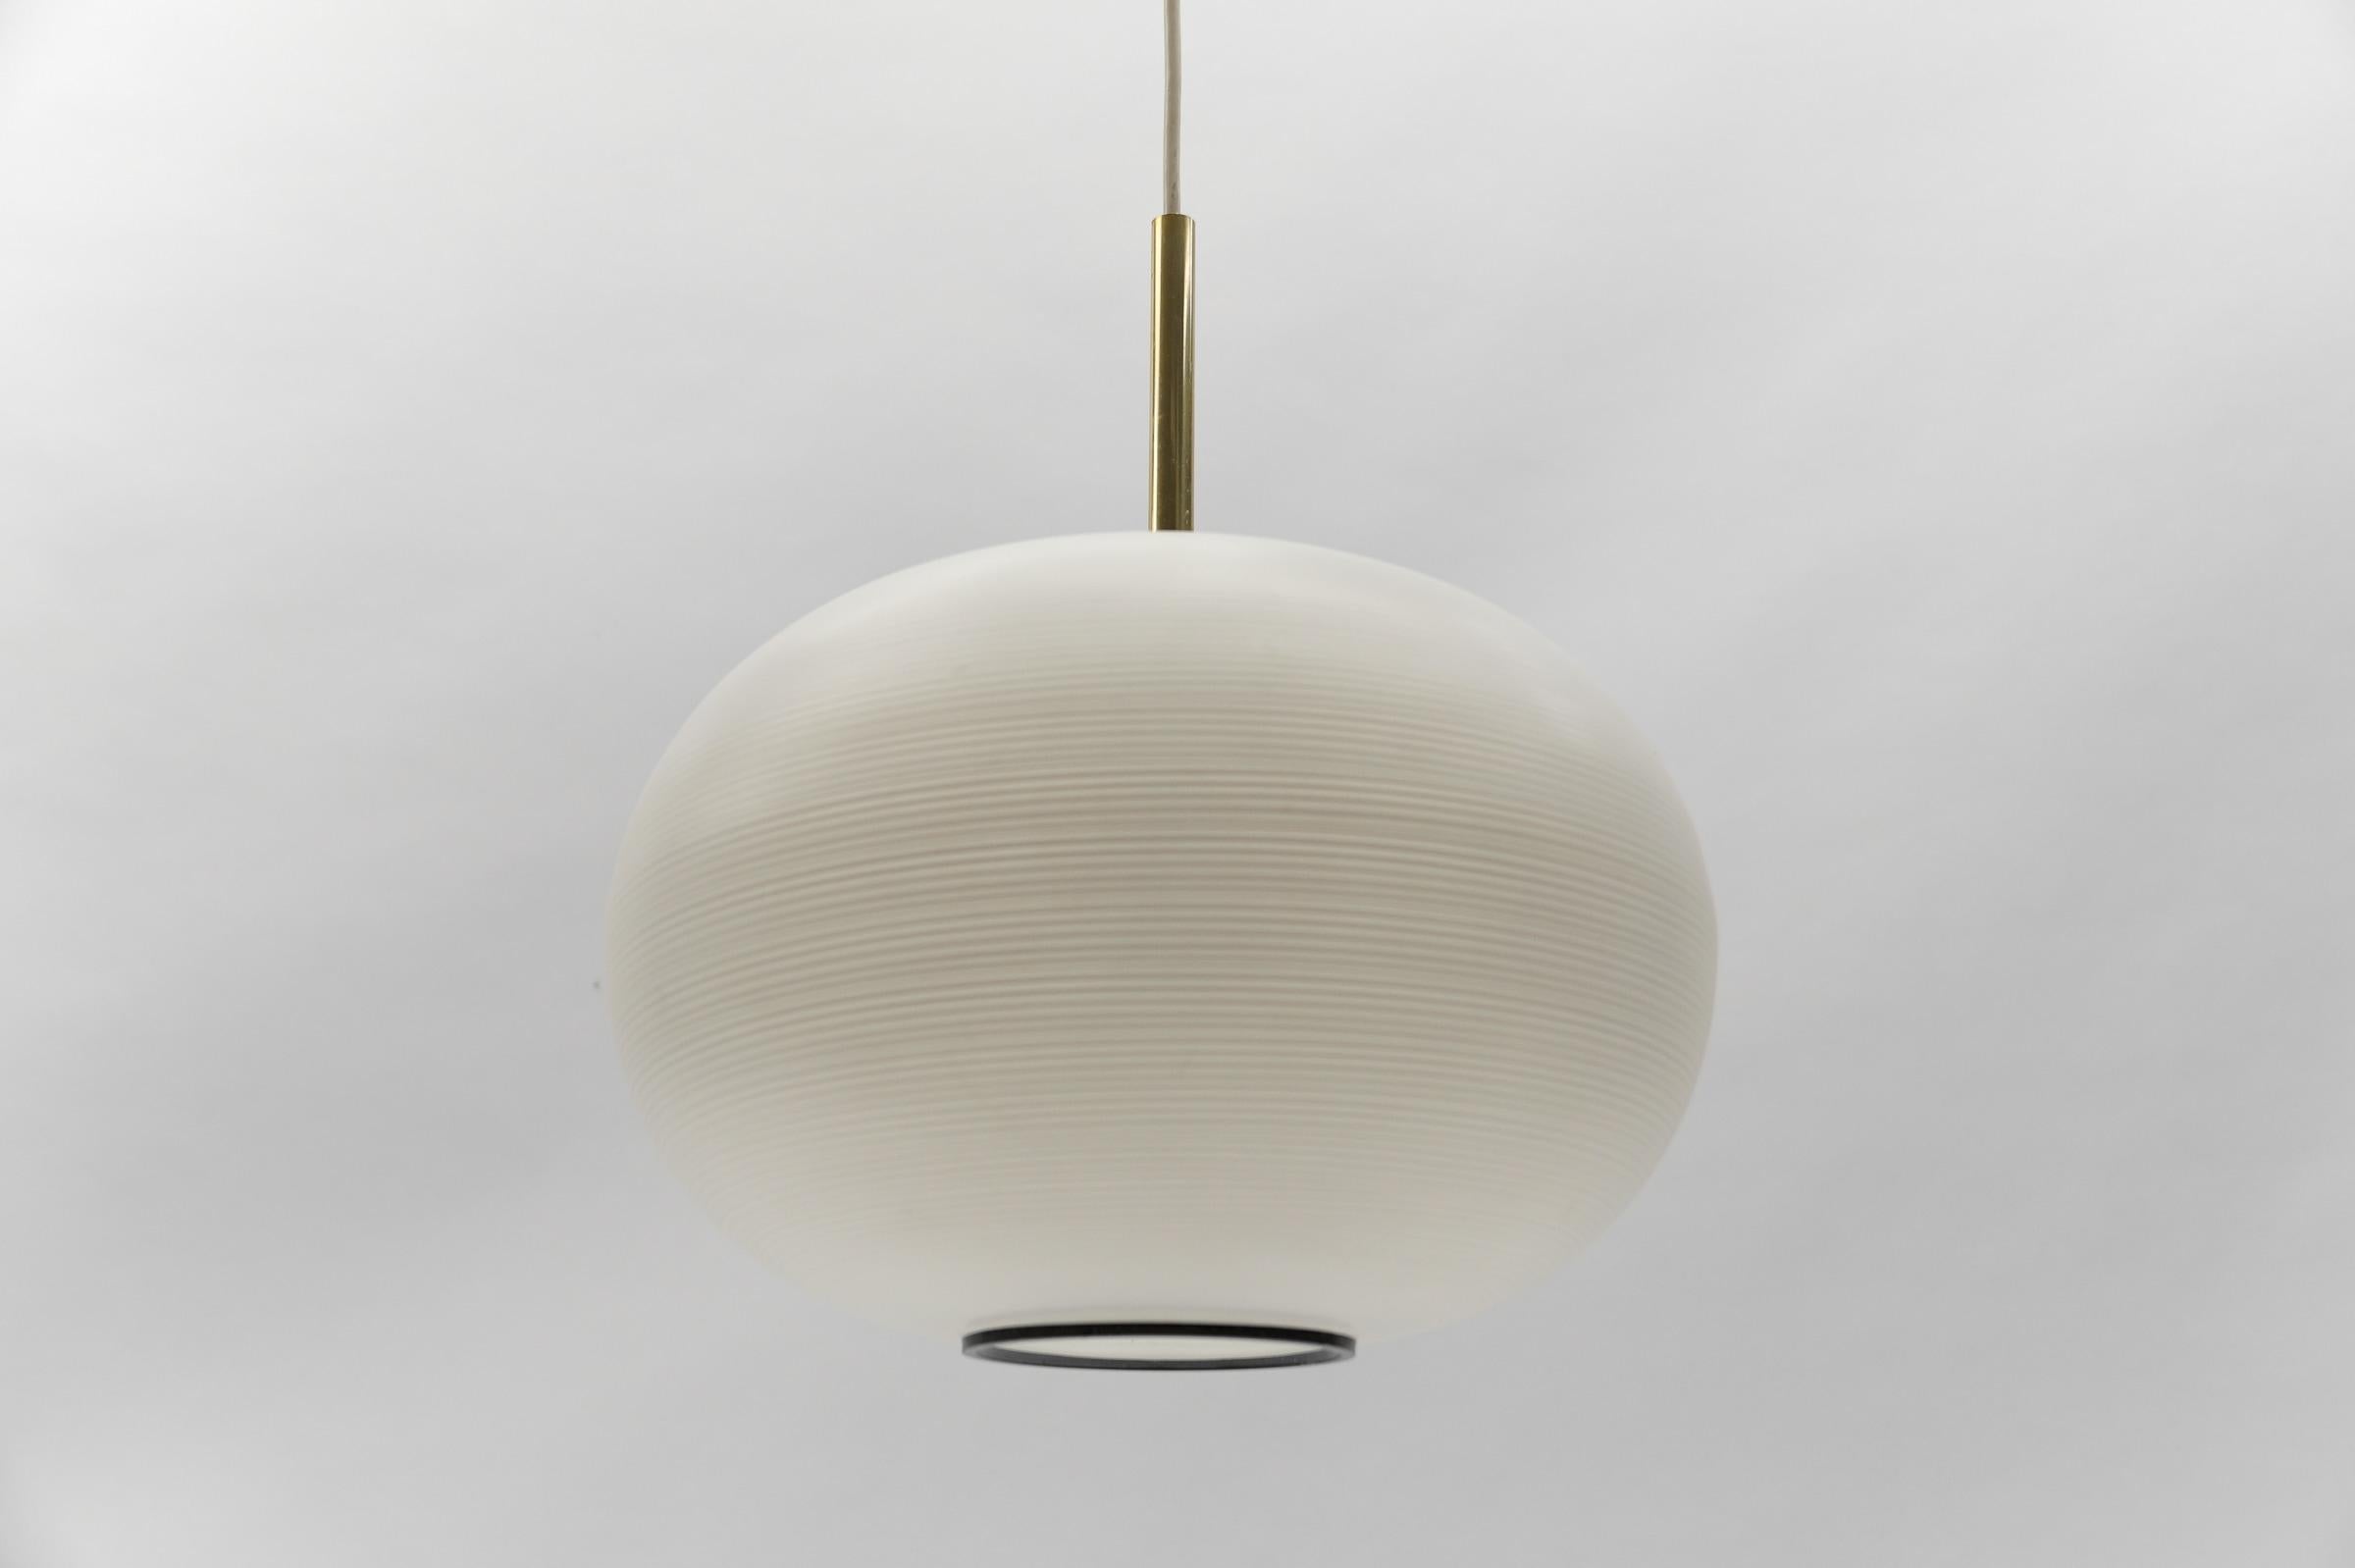 Mid Century Modern Opaline Glass Ball Pendant Lamp by Doria, 1960s Germany For Sale 1